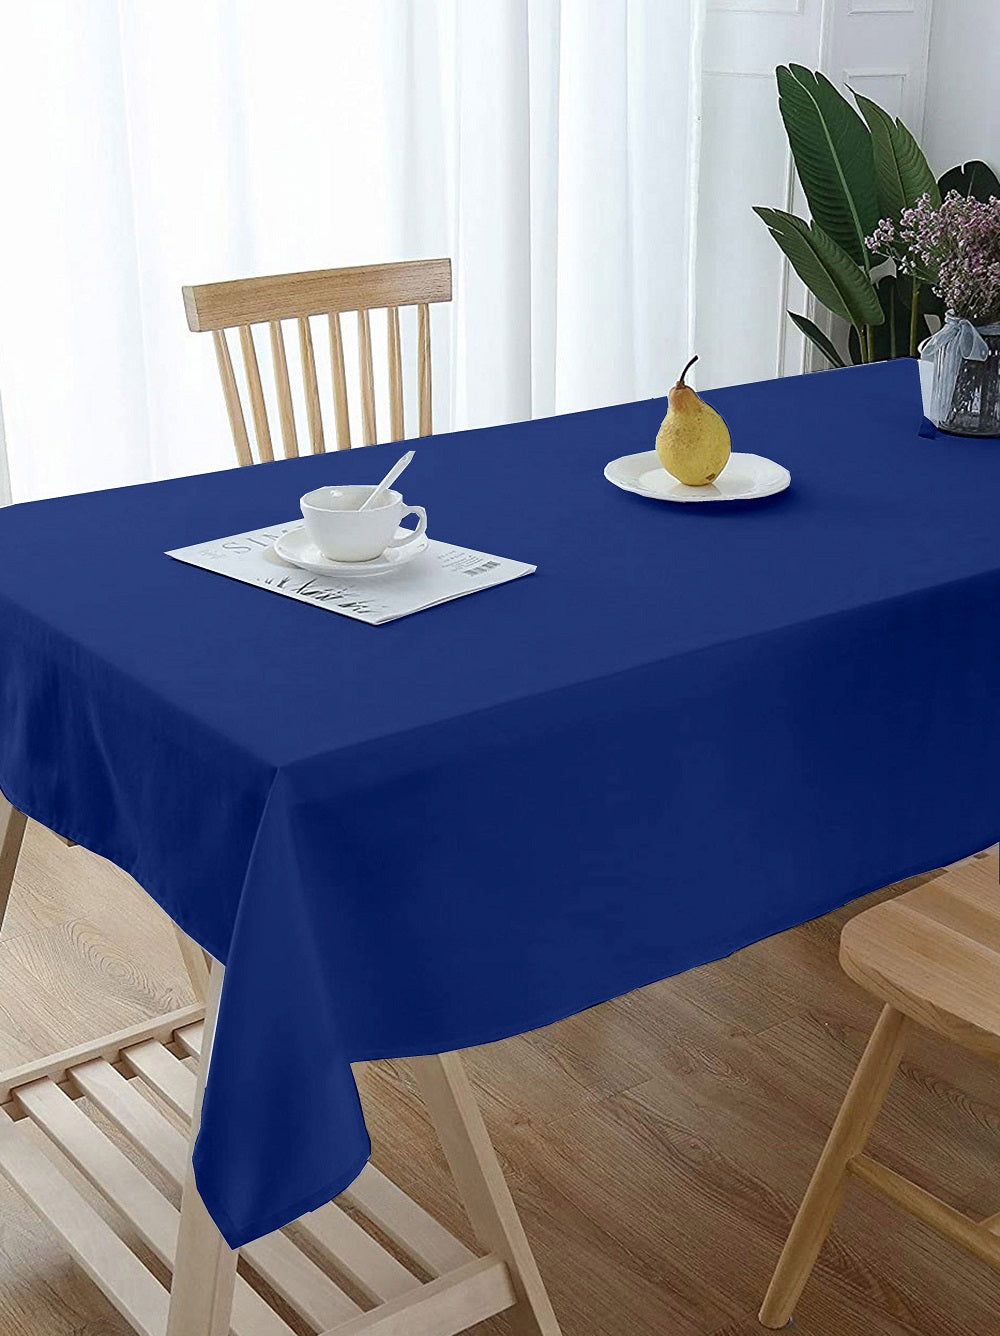 Lushomes dining table cover 6 seater, Ink Blue Classic Plain Dining Table Cover Cloth (Size 60 x 70”, 6 Seater Table Cloth)